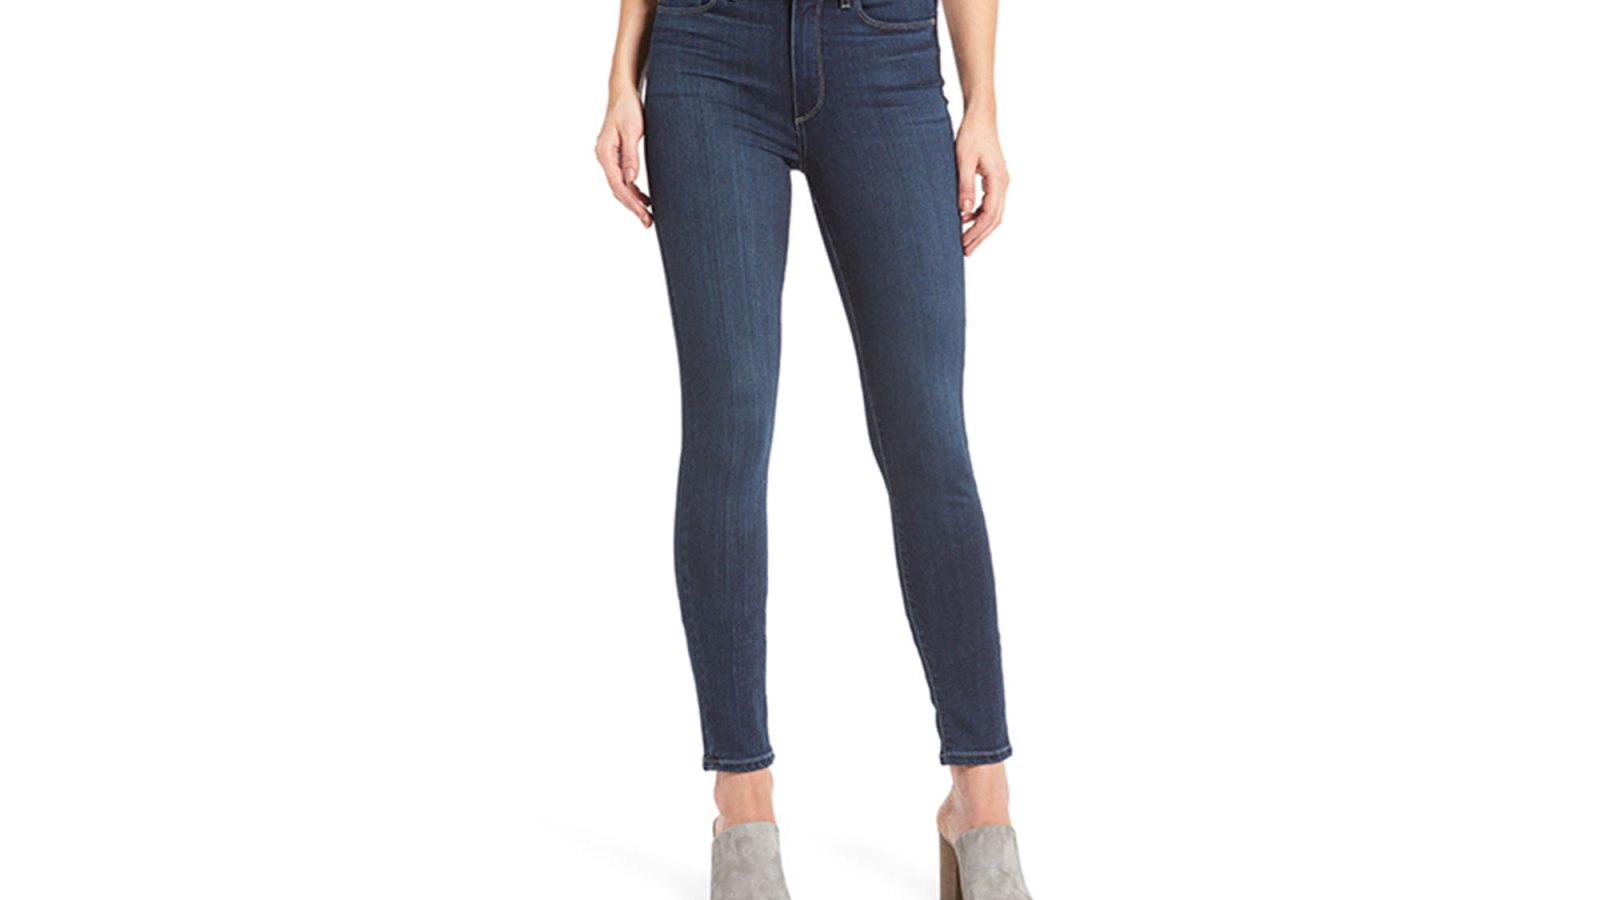 Paige Transcend - Hoxton High Waist Ankle Skinny Jeans